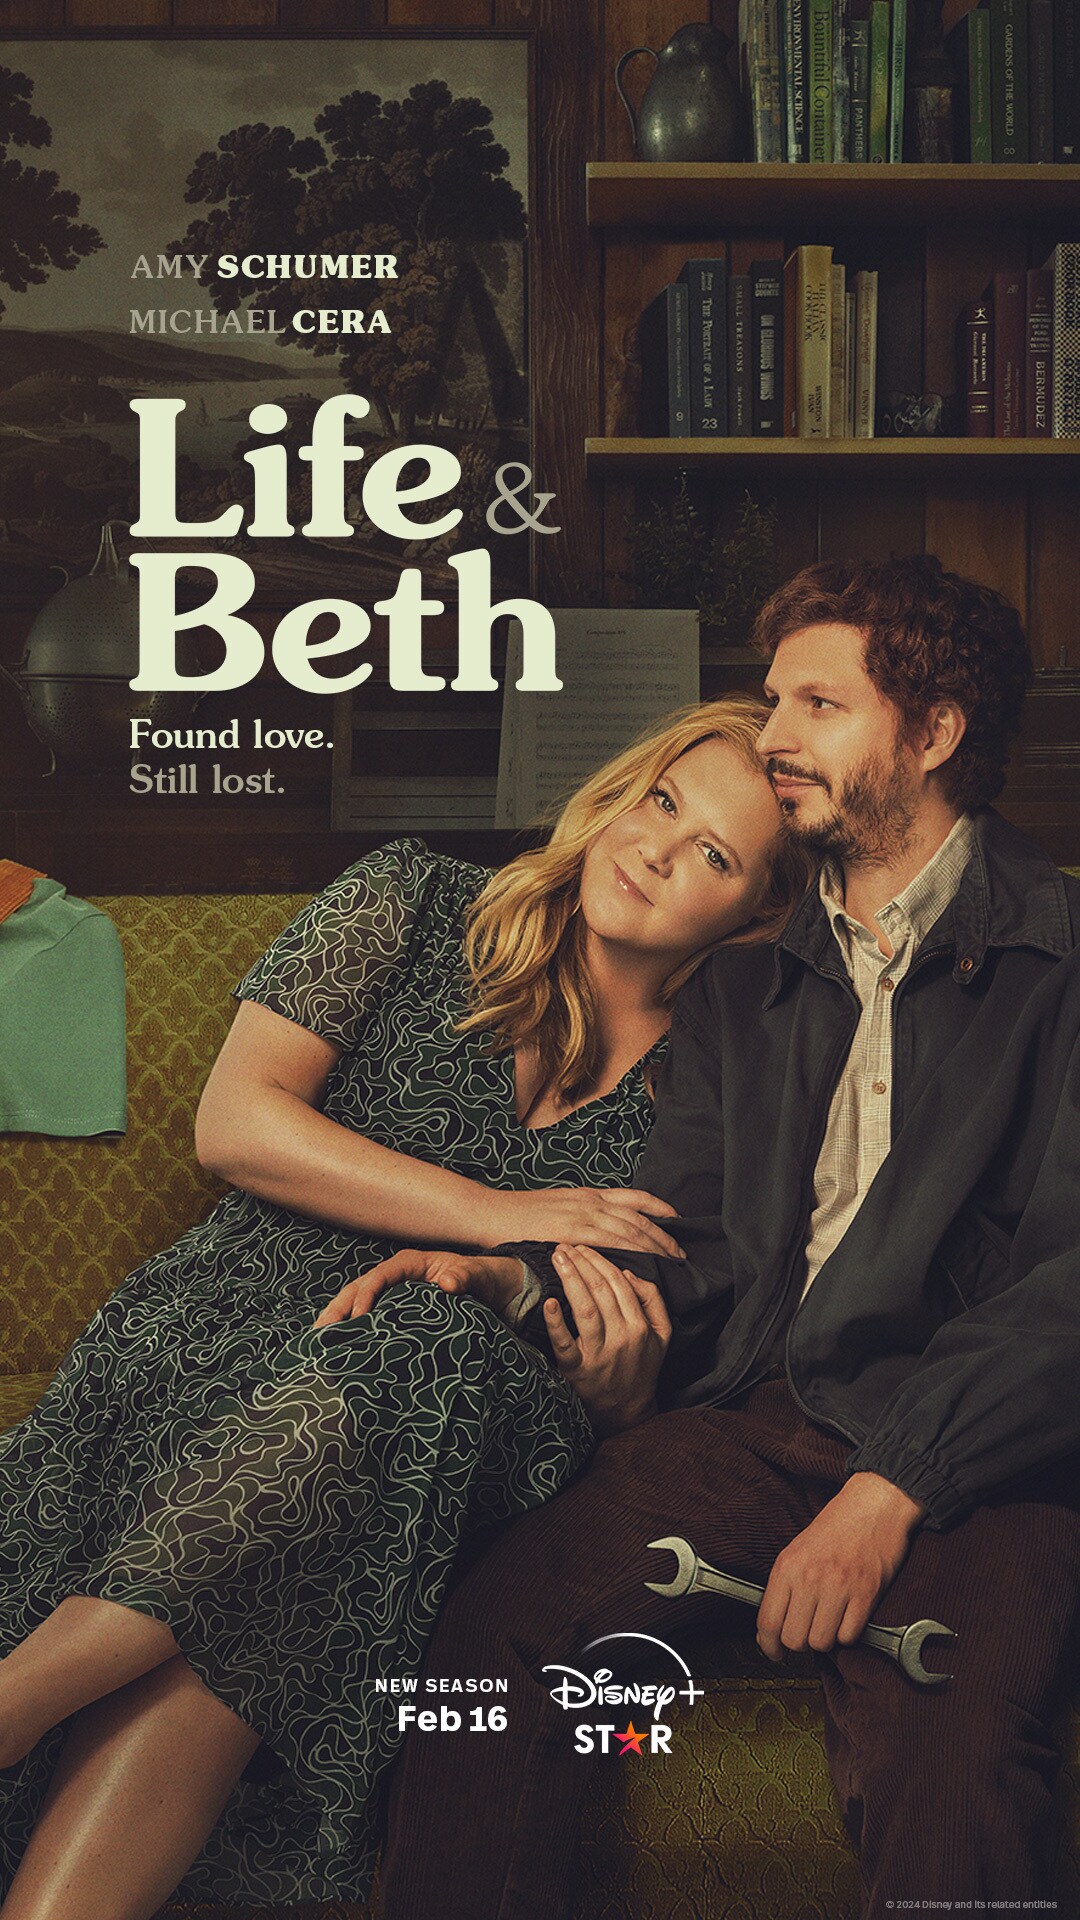 Life and Beth is streaming soon on Disney+